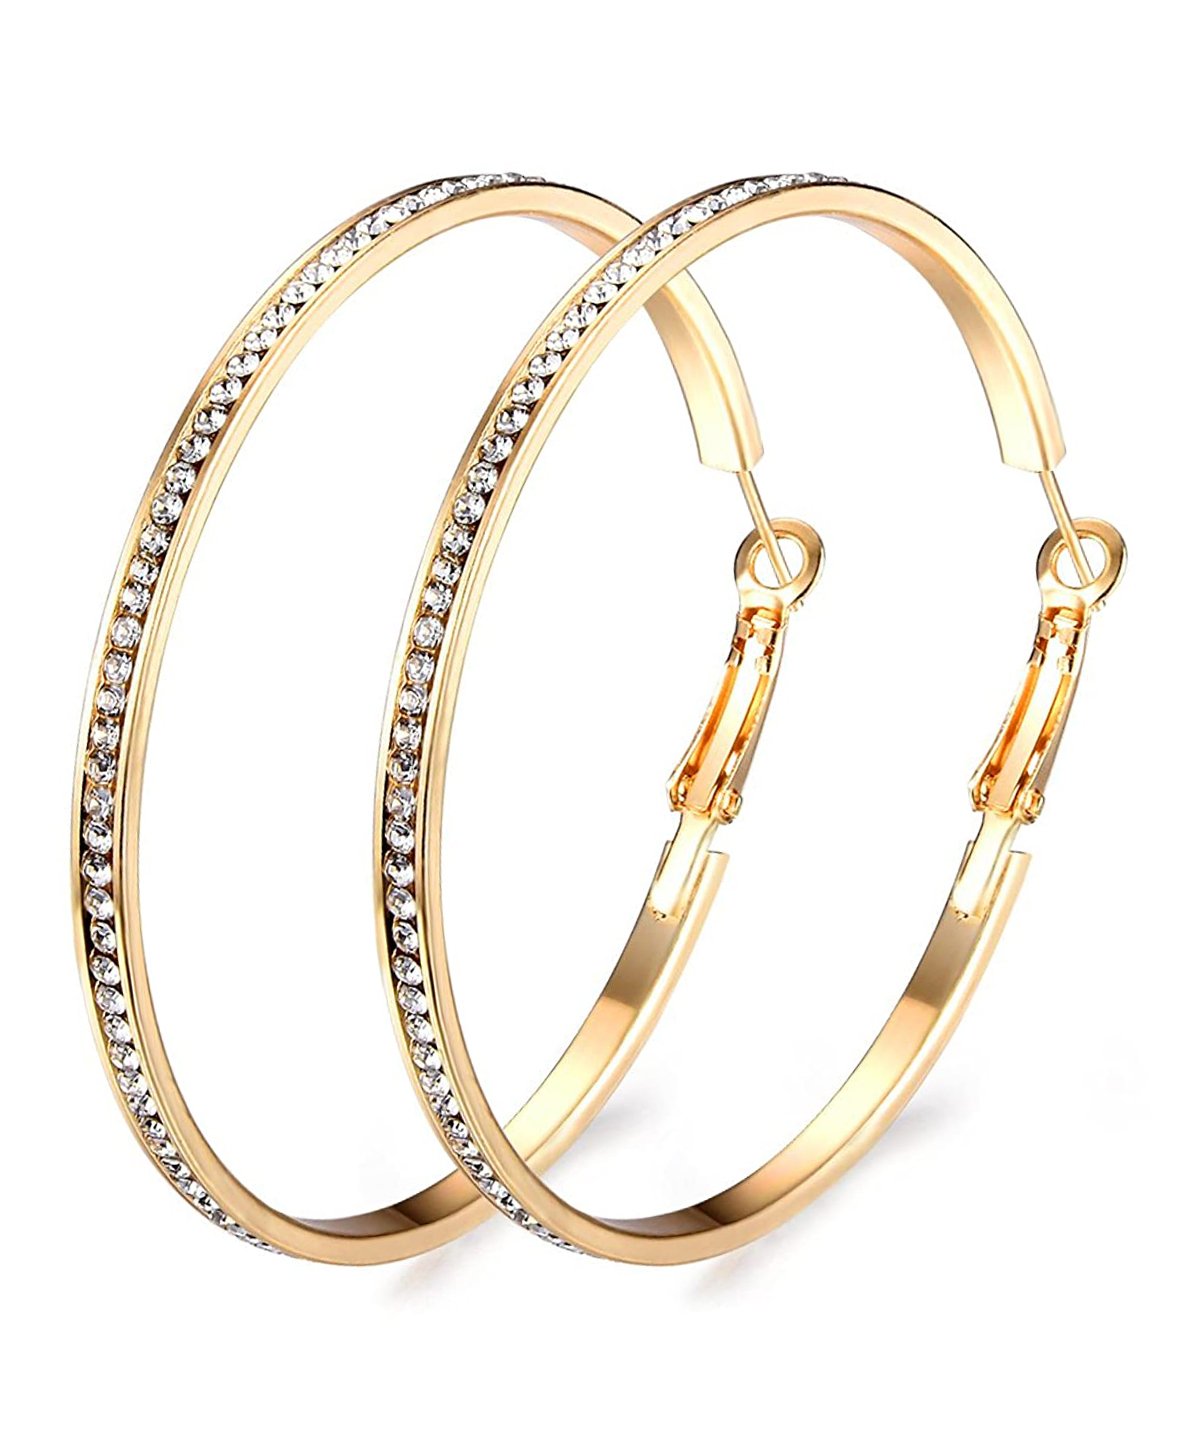 Pave Hoop Earring With Crystals in 18K Gold Plated